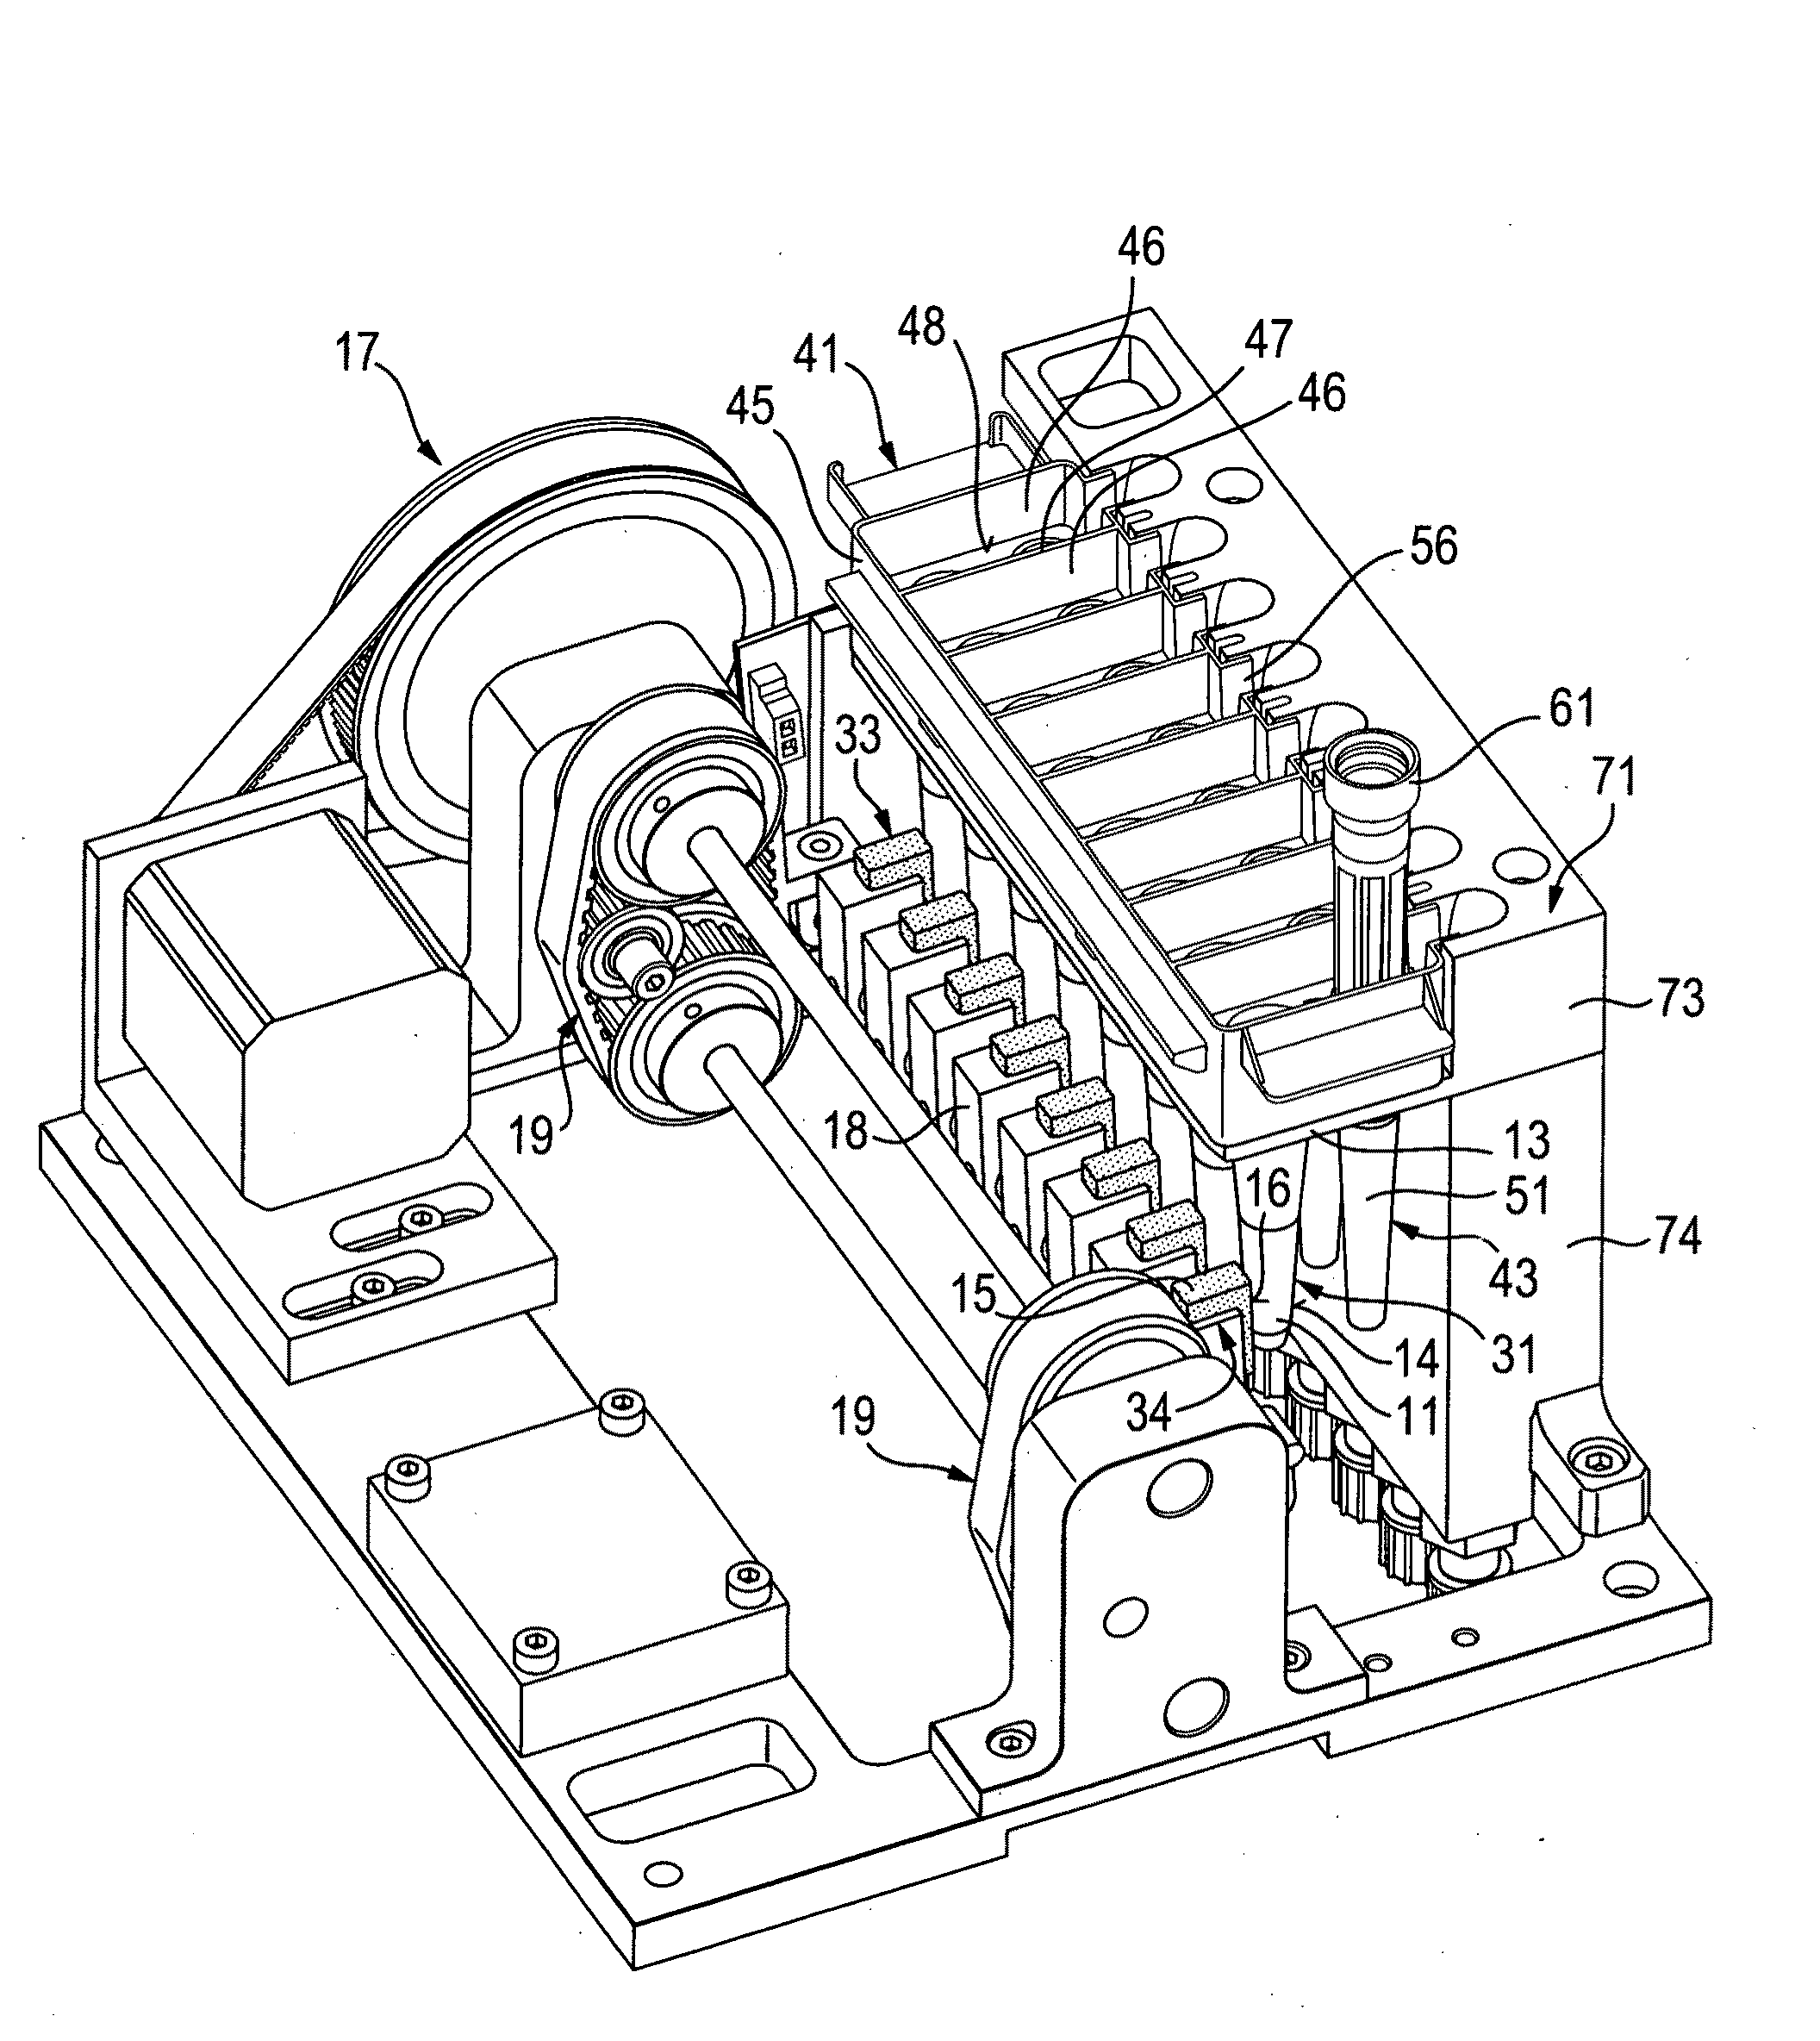 Apparatus for separating magnetic particles from liquids containing said particles, and an array of vessels suitable for use with such an apparatus